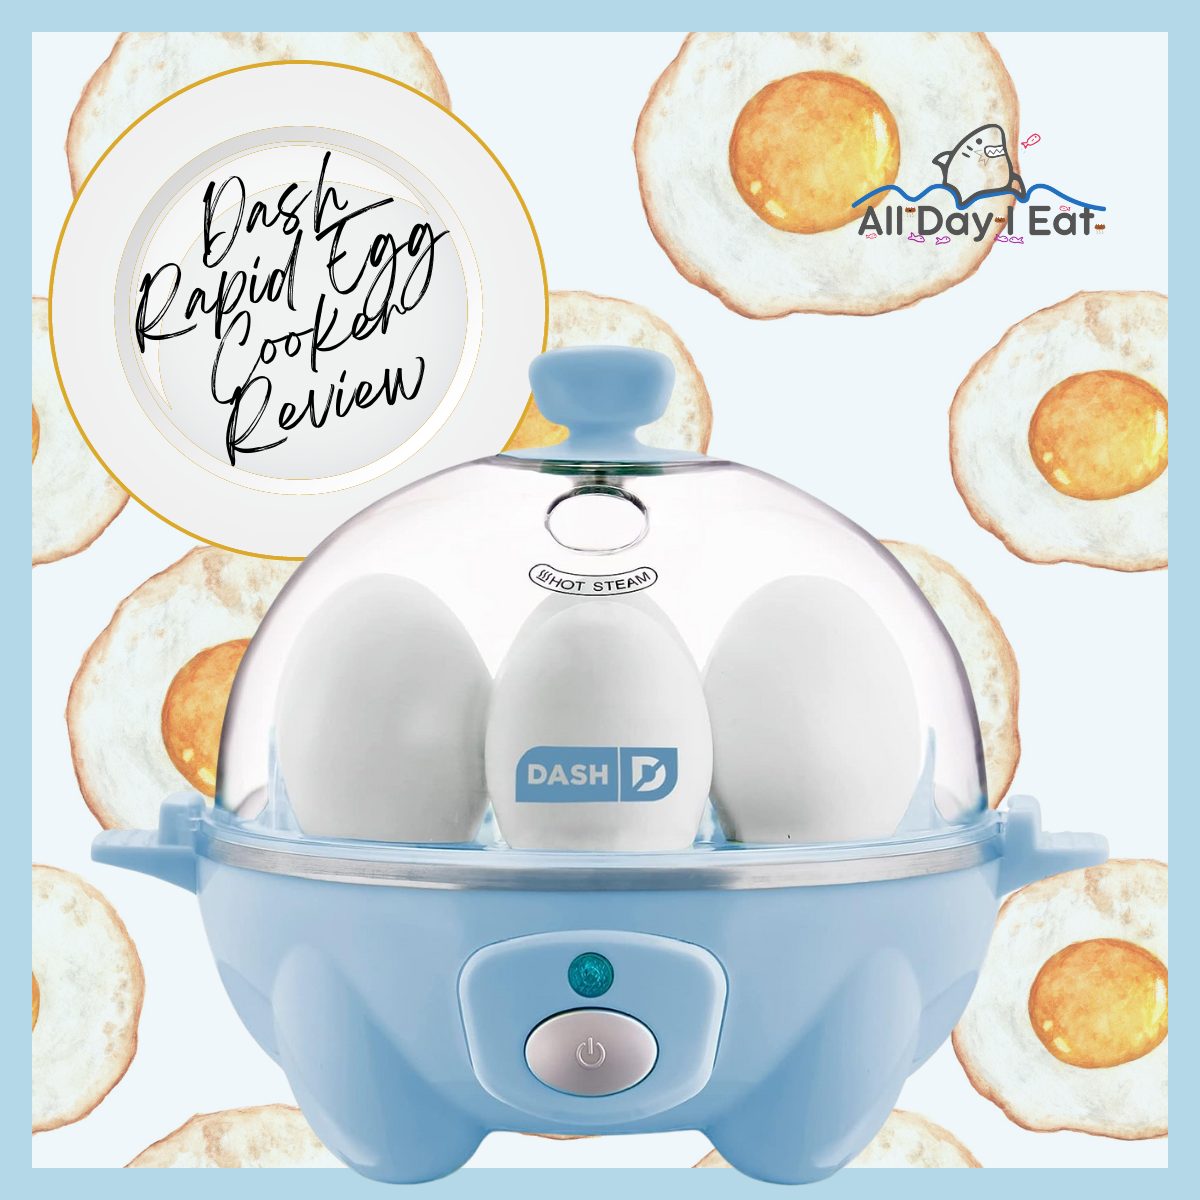 Is it Worth Buying? Egg cooker review, How to use an egg cooker